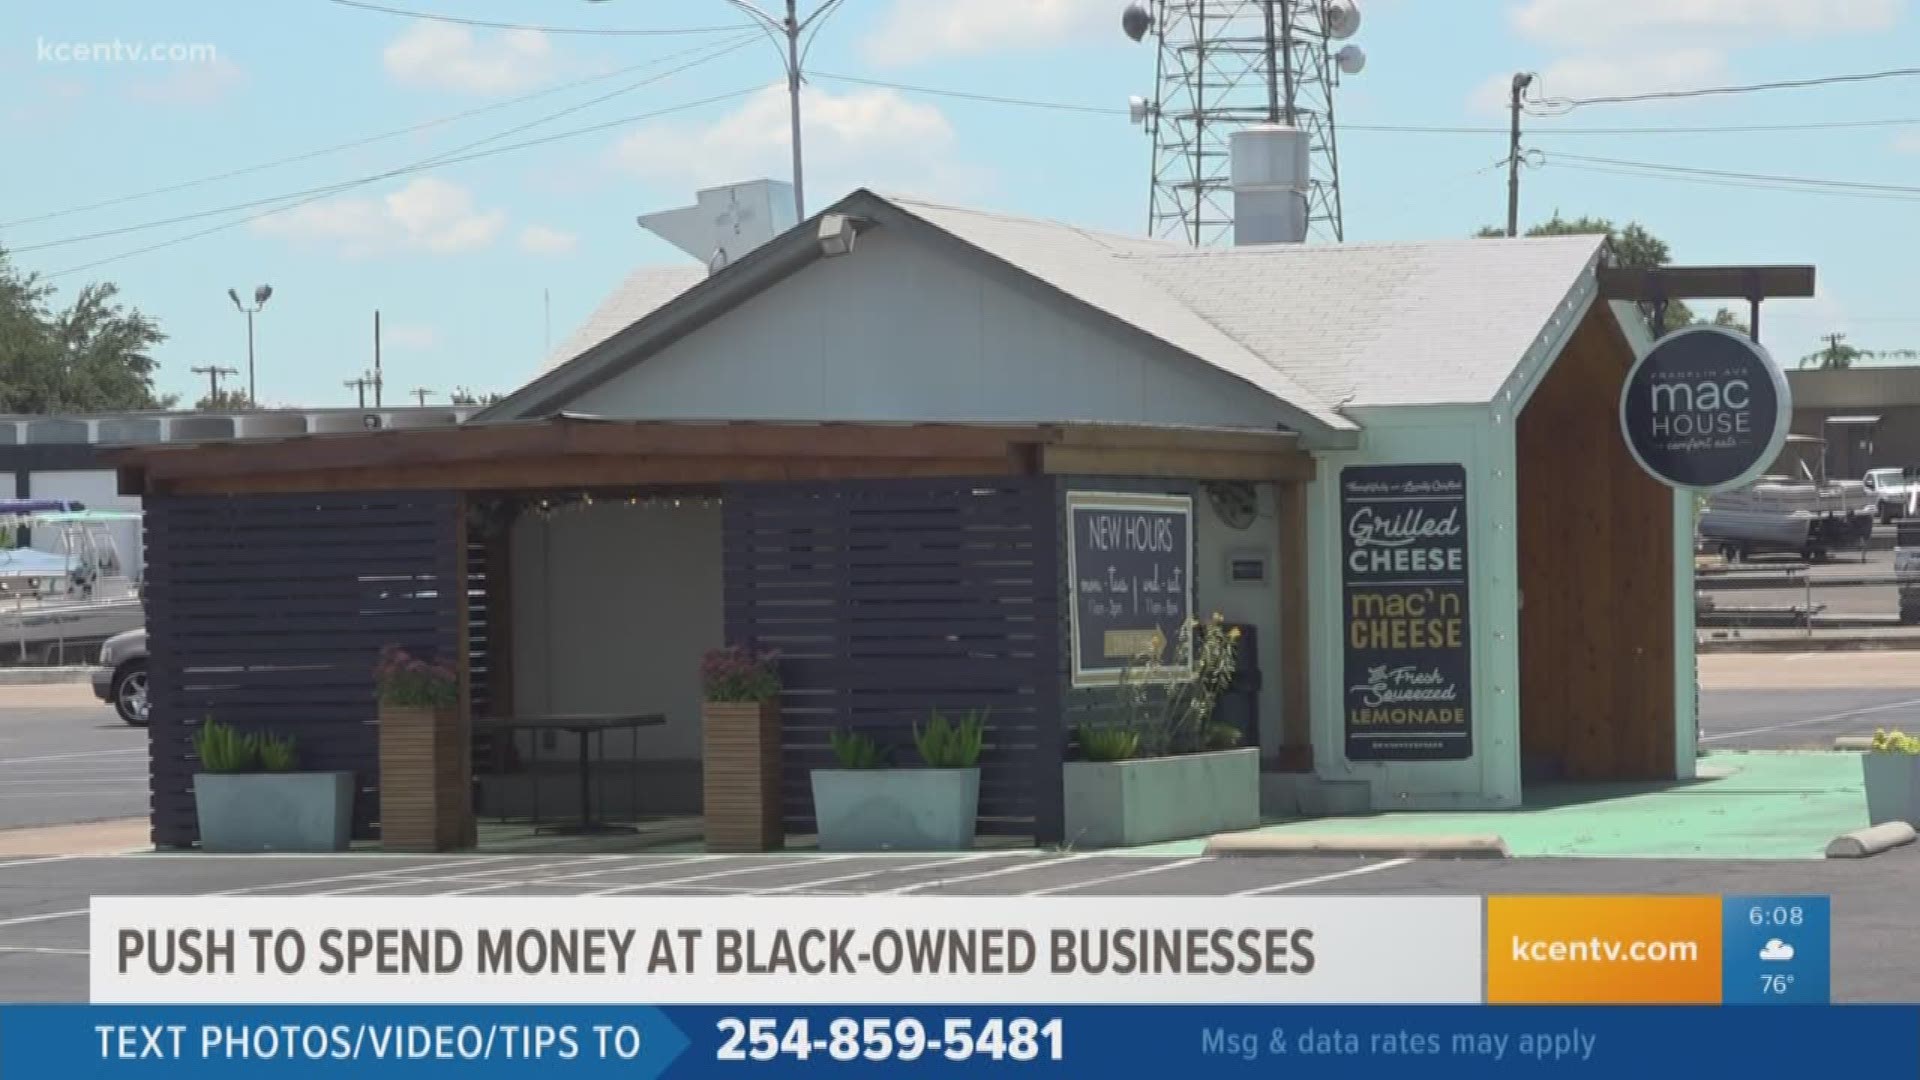 There's a nationwide push to spend money at black-owned businesses, and it's catching on right here in Central Texas.